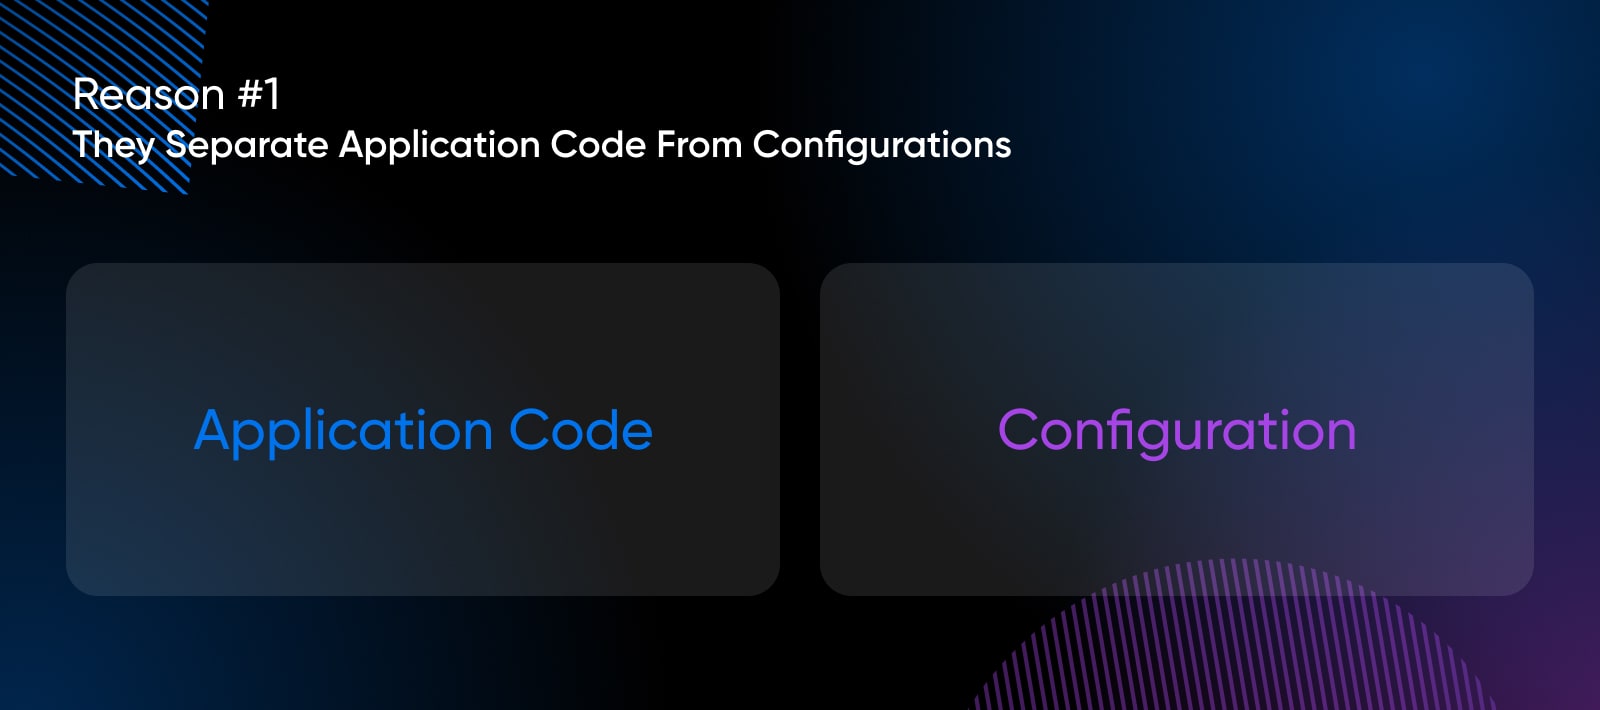 reason #1 they separate application code from configurations showing these two elements as separate boxes in the graphic 